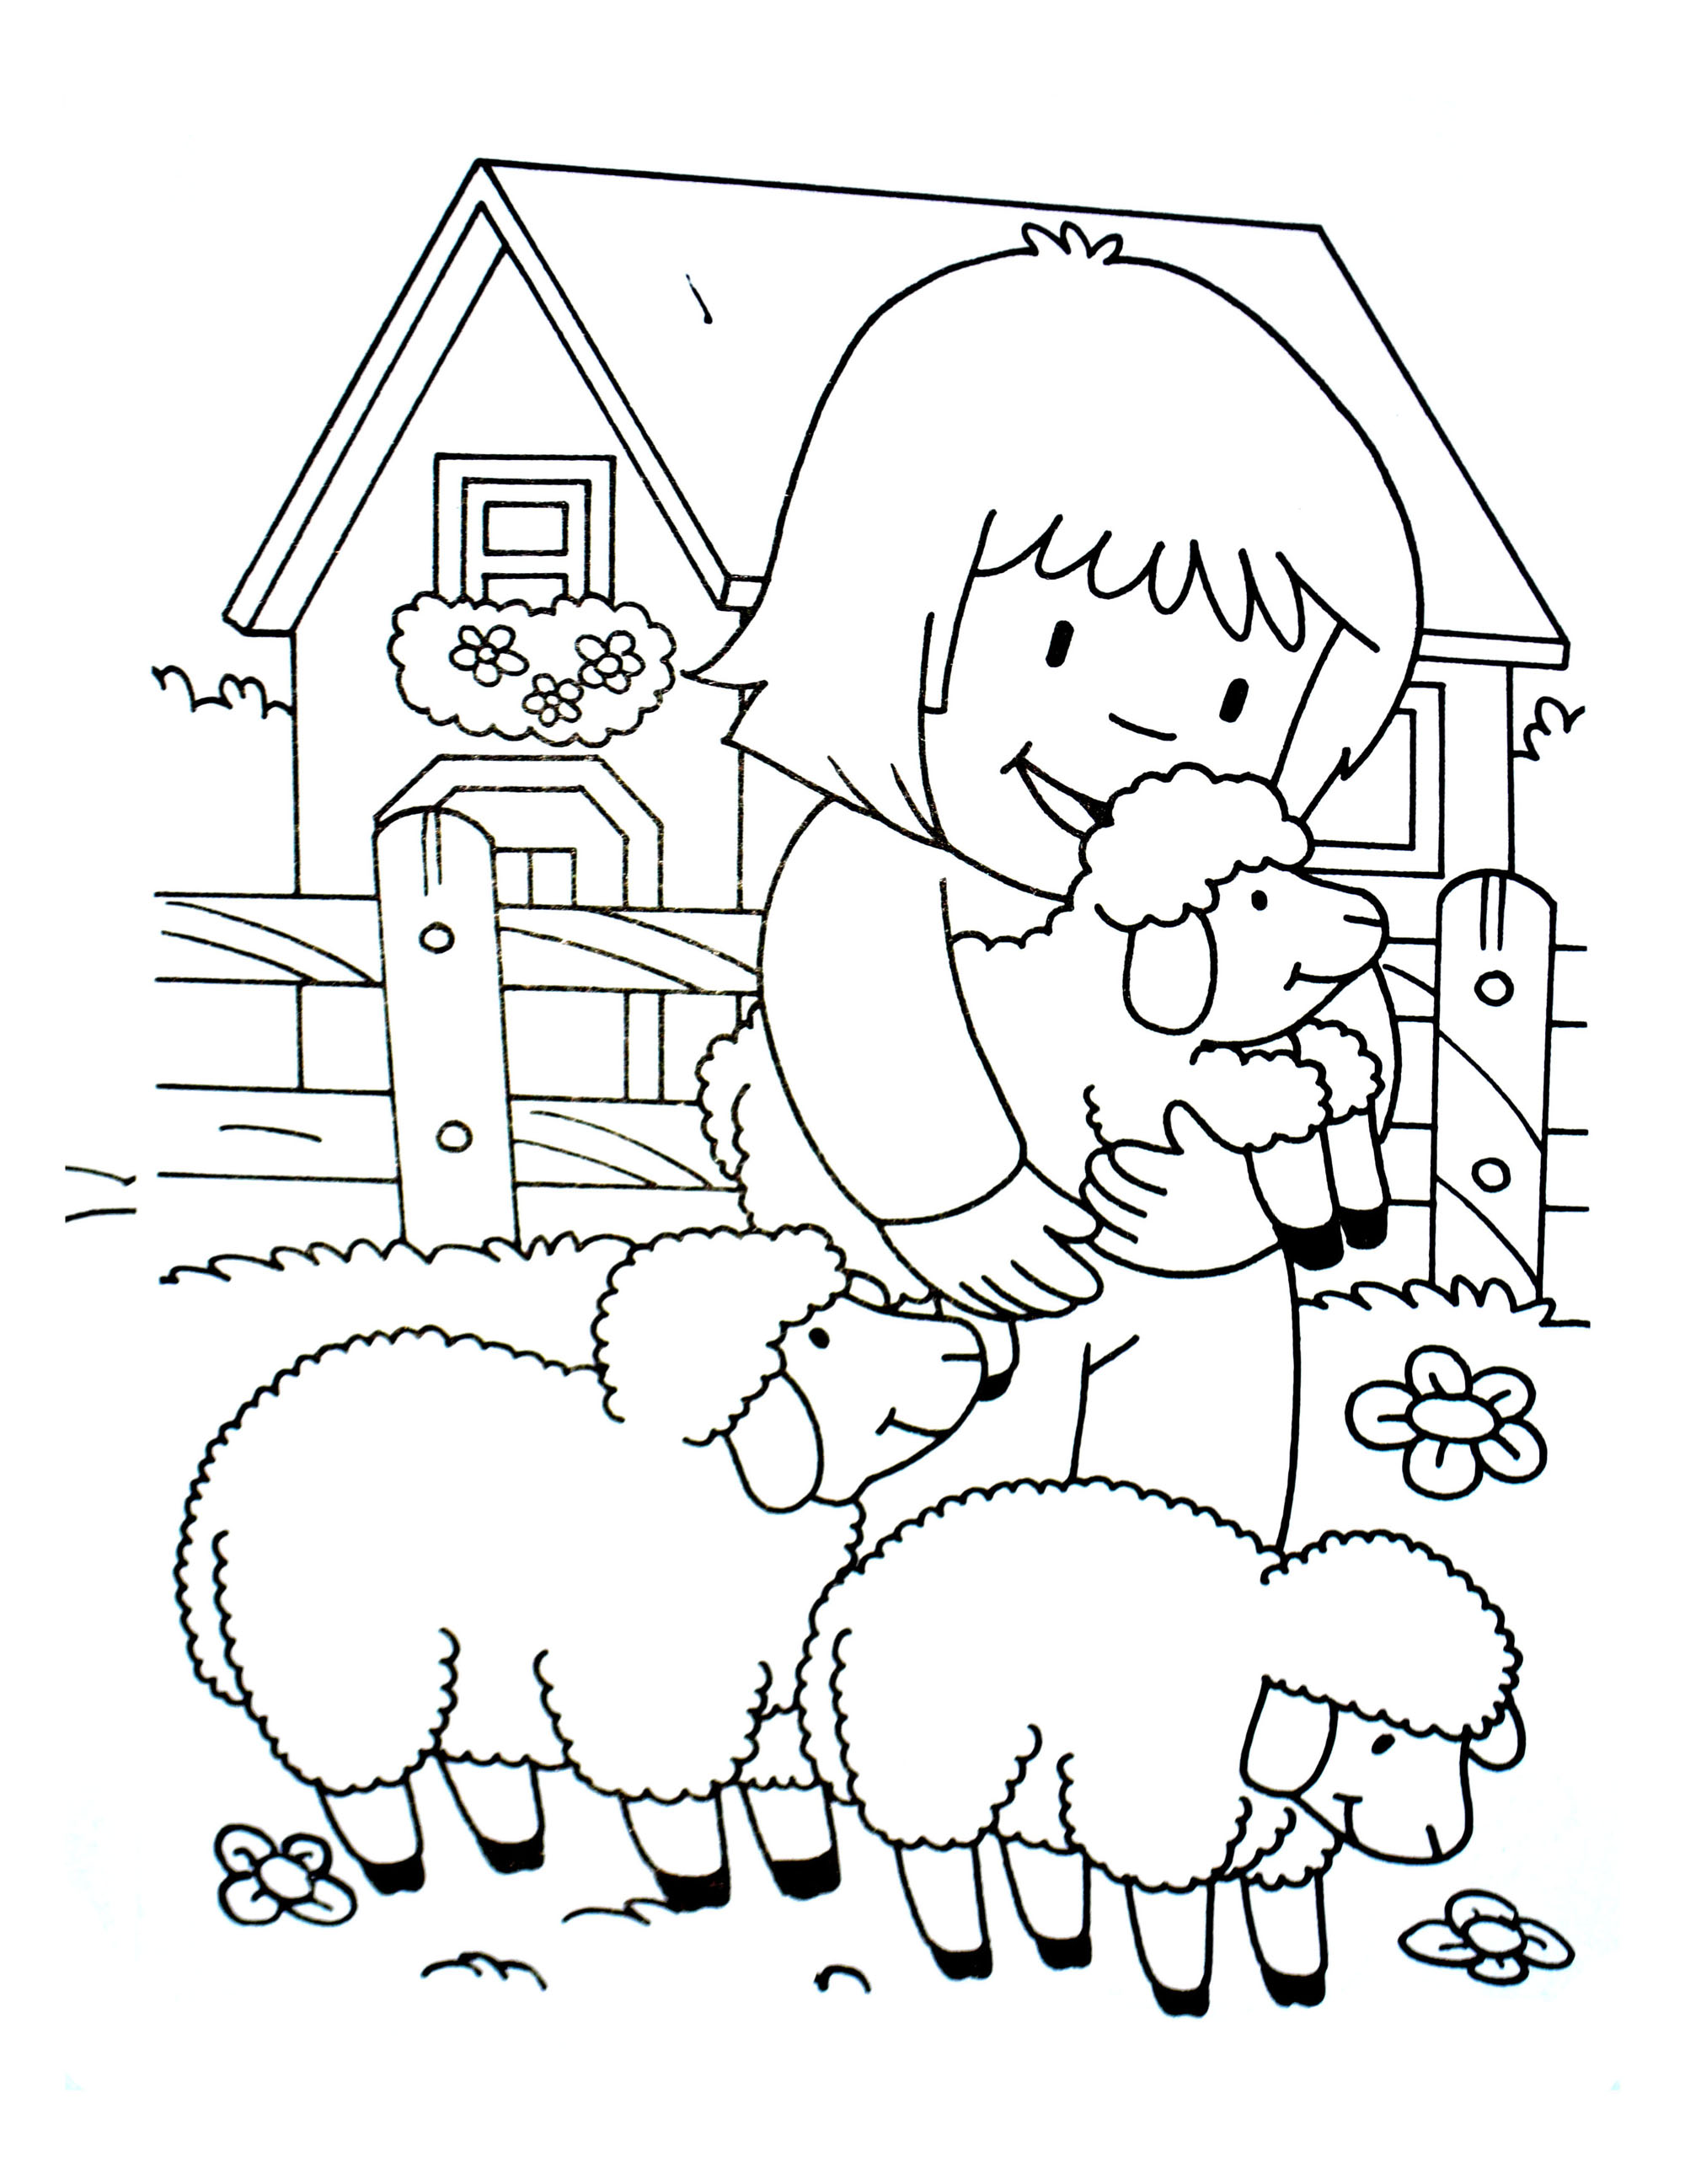 agriculture tractor coloring page Coloring farm pages farming scene